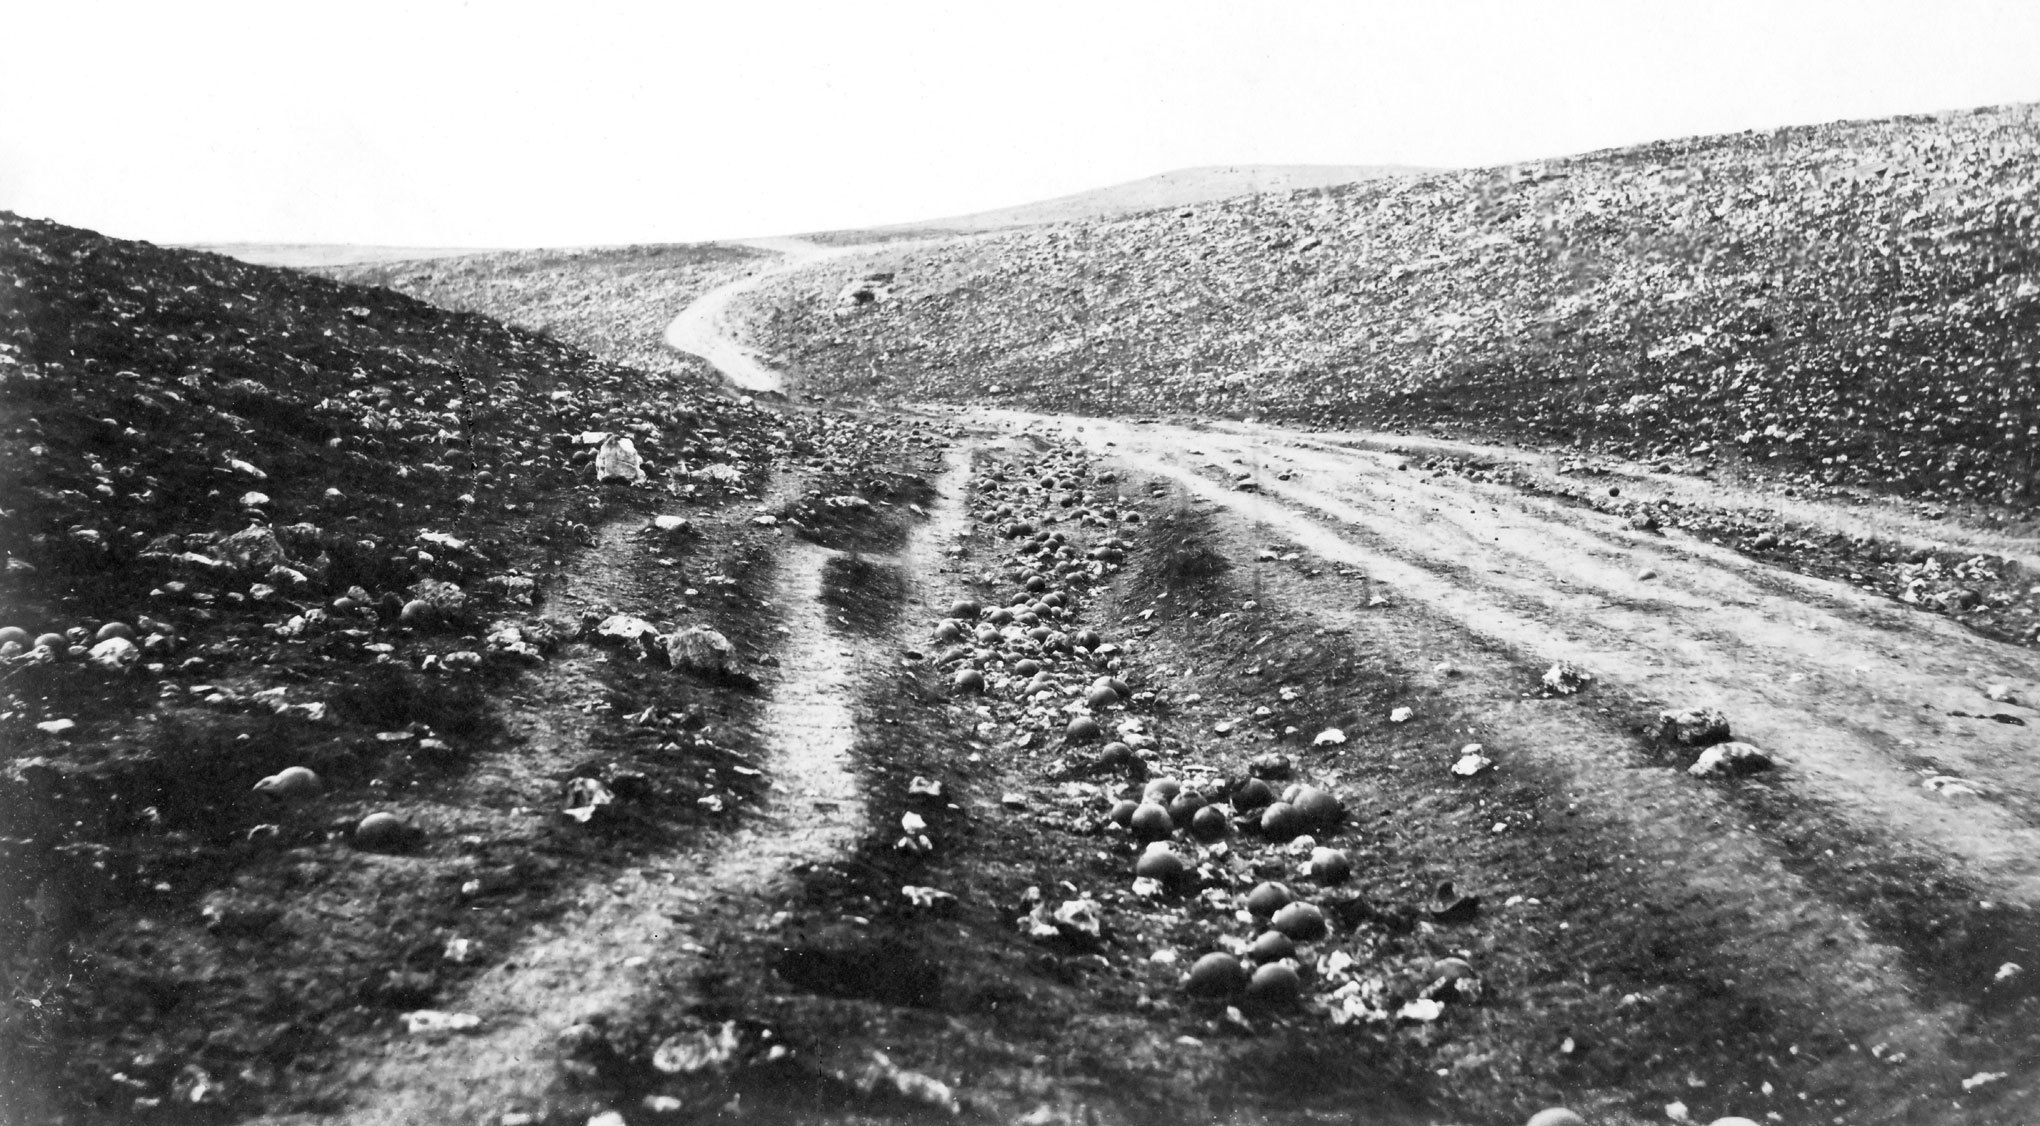 Valley of the Shadow of Death. Image by Roger Fenton/Wikimedia Commons. Crimea, 1855.